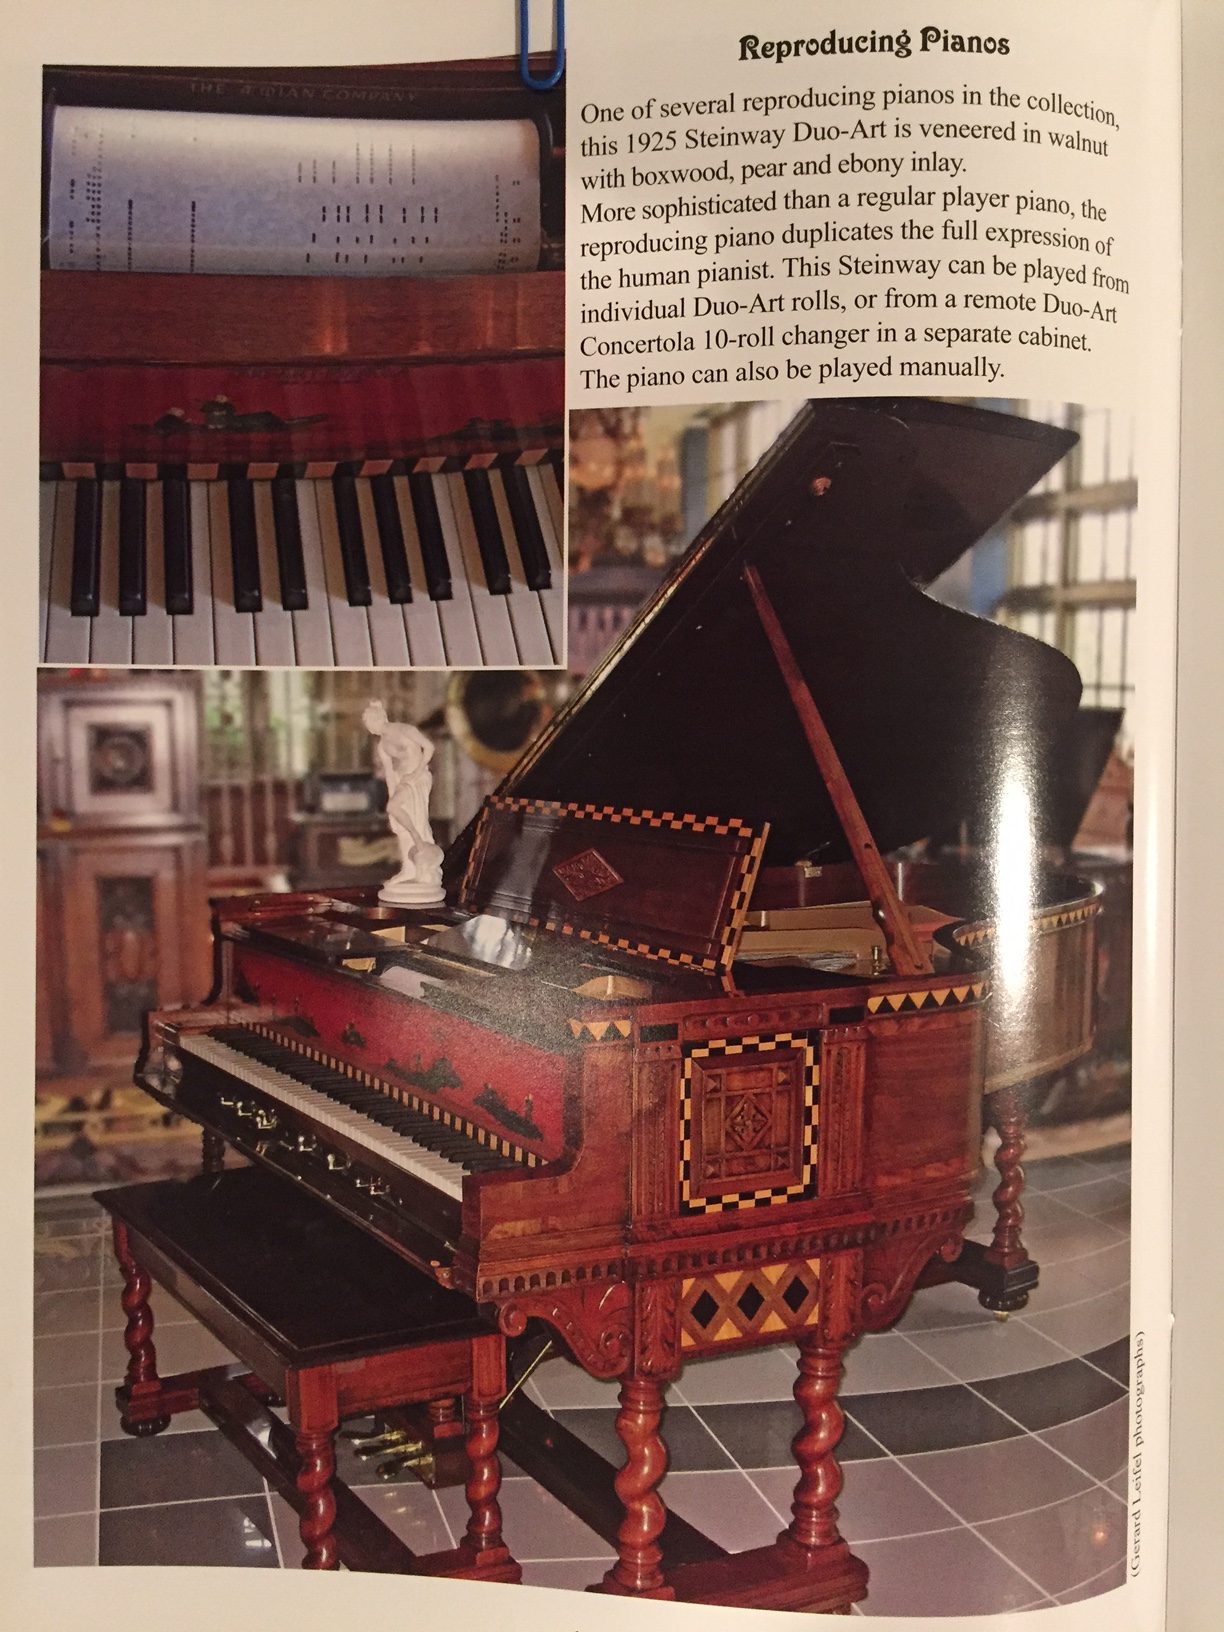 Magazine page with pictures and descriptions of the 1925 Steinway Duo-Art Piano